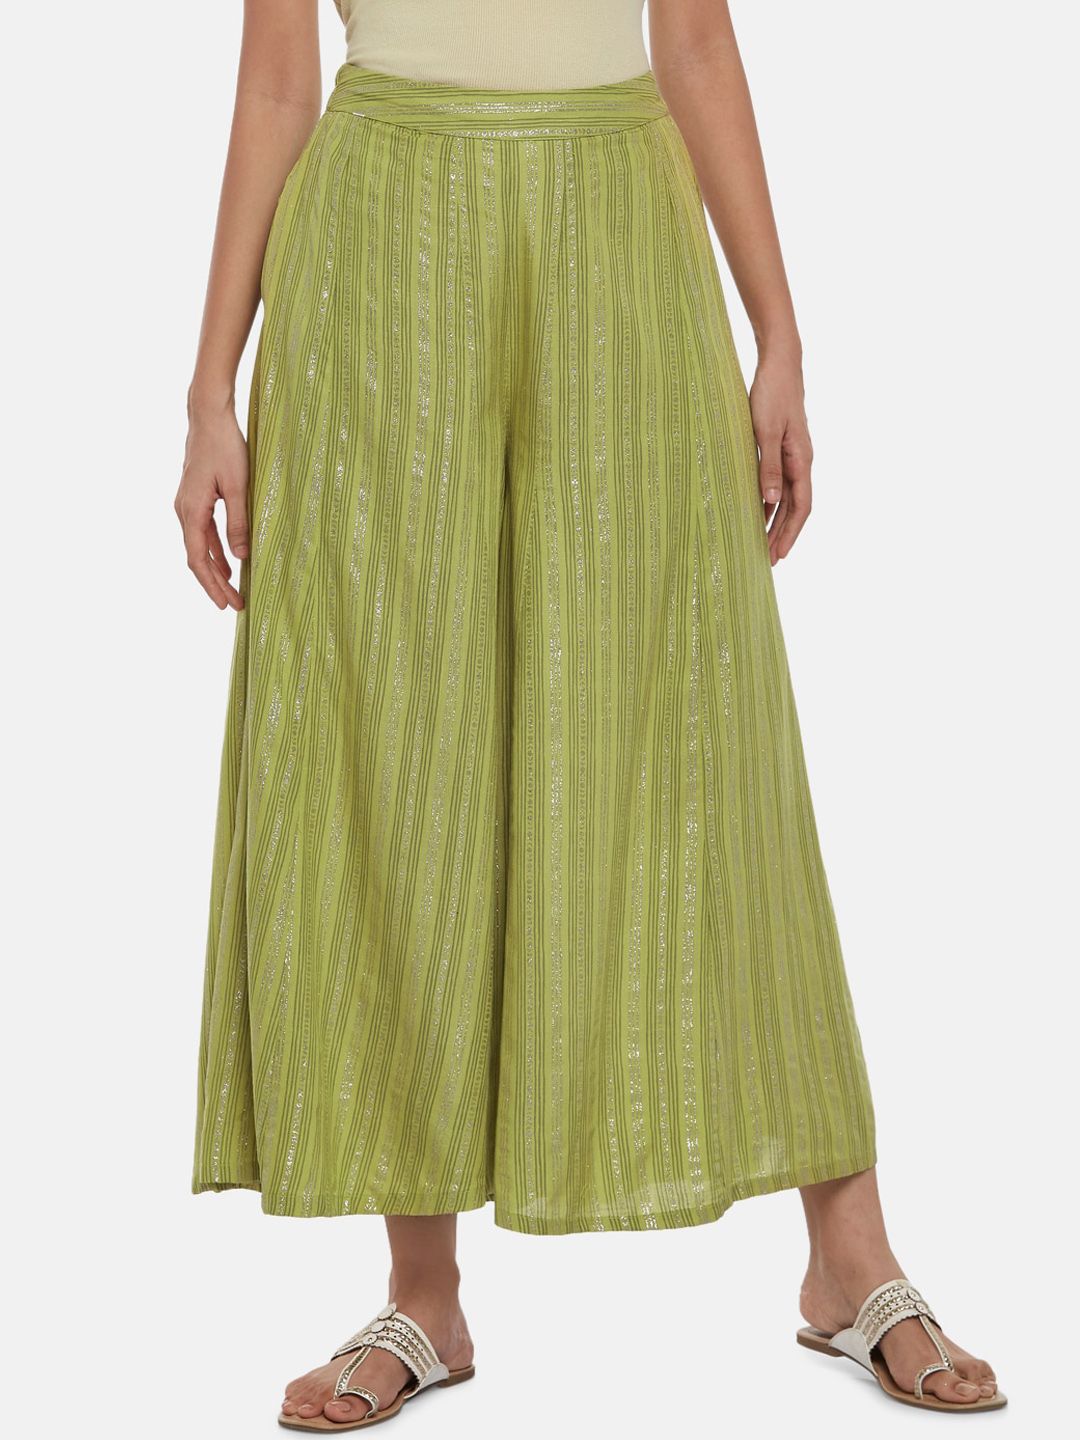 AKKRITI BY PANTALOONS Women Green Printed Pleated Culottes Trousers Price in India